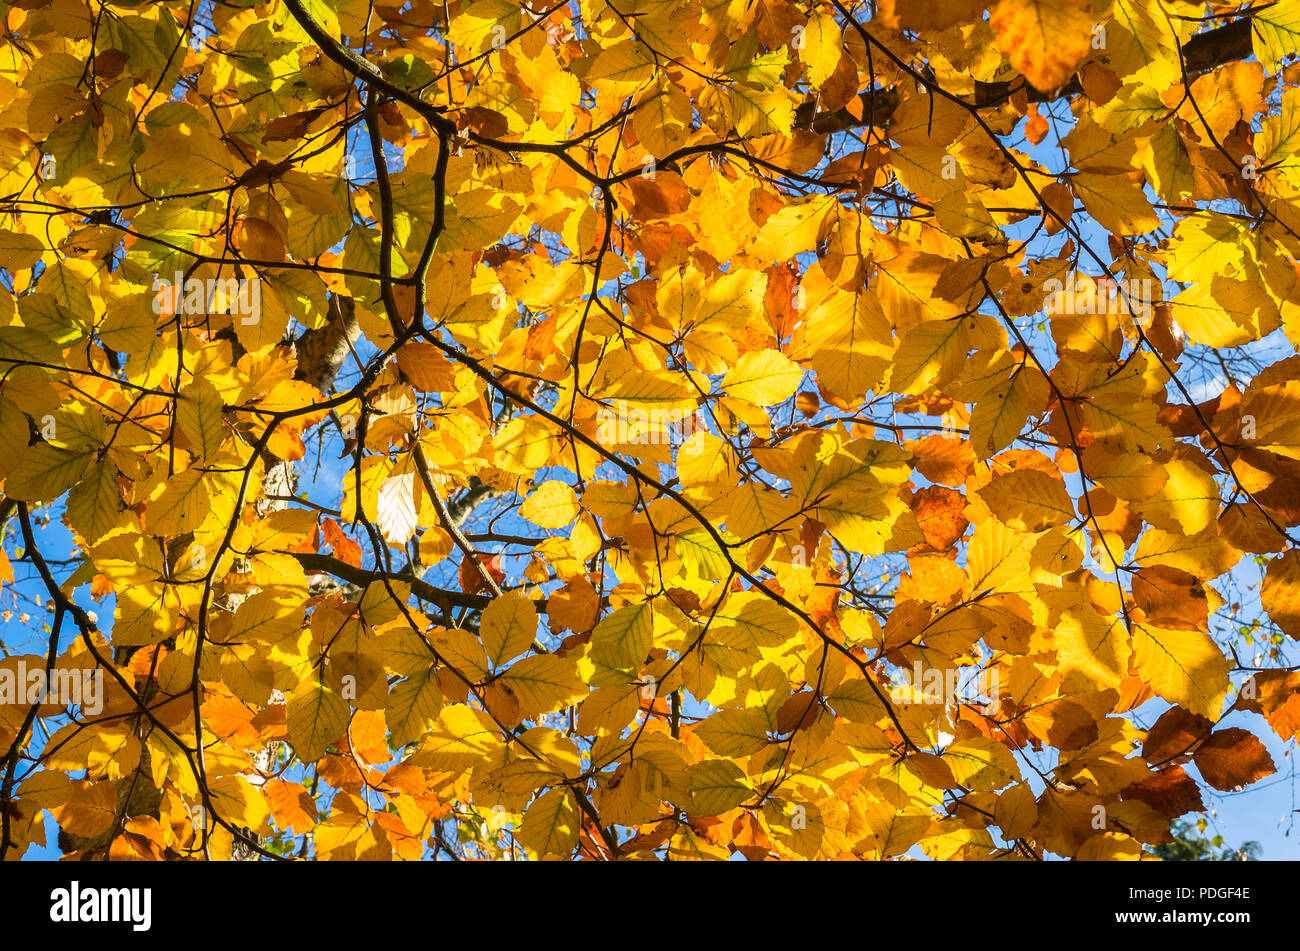 A canopy of golden leaves on a mature beech tree in late autumn in an English garden Stock Photo